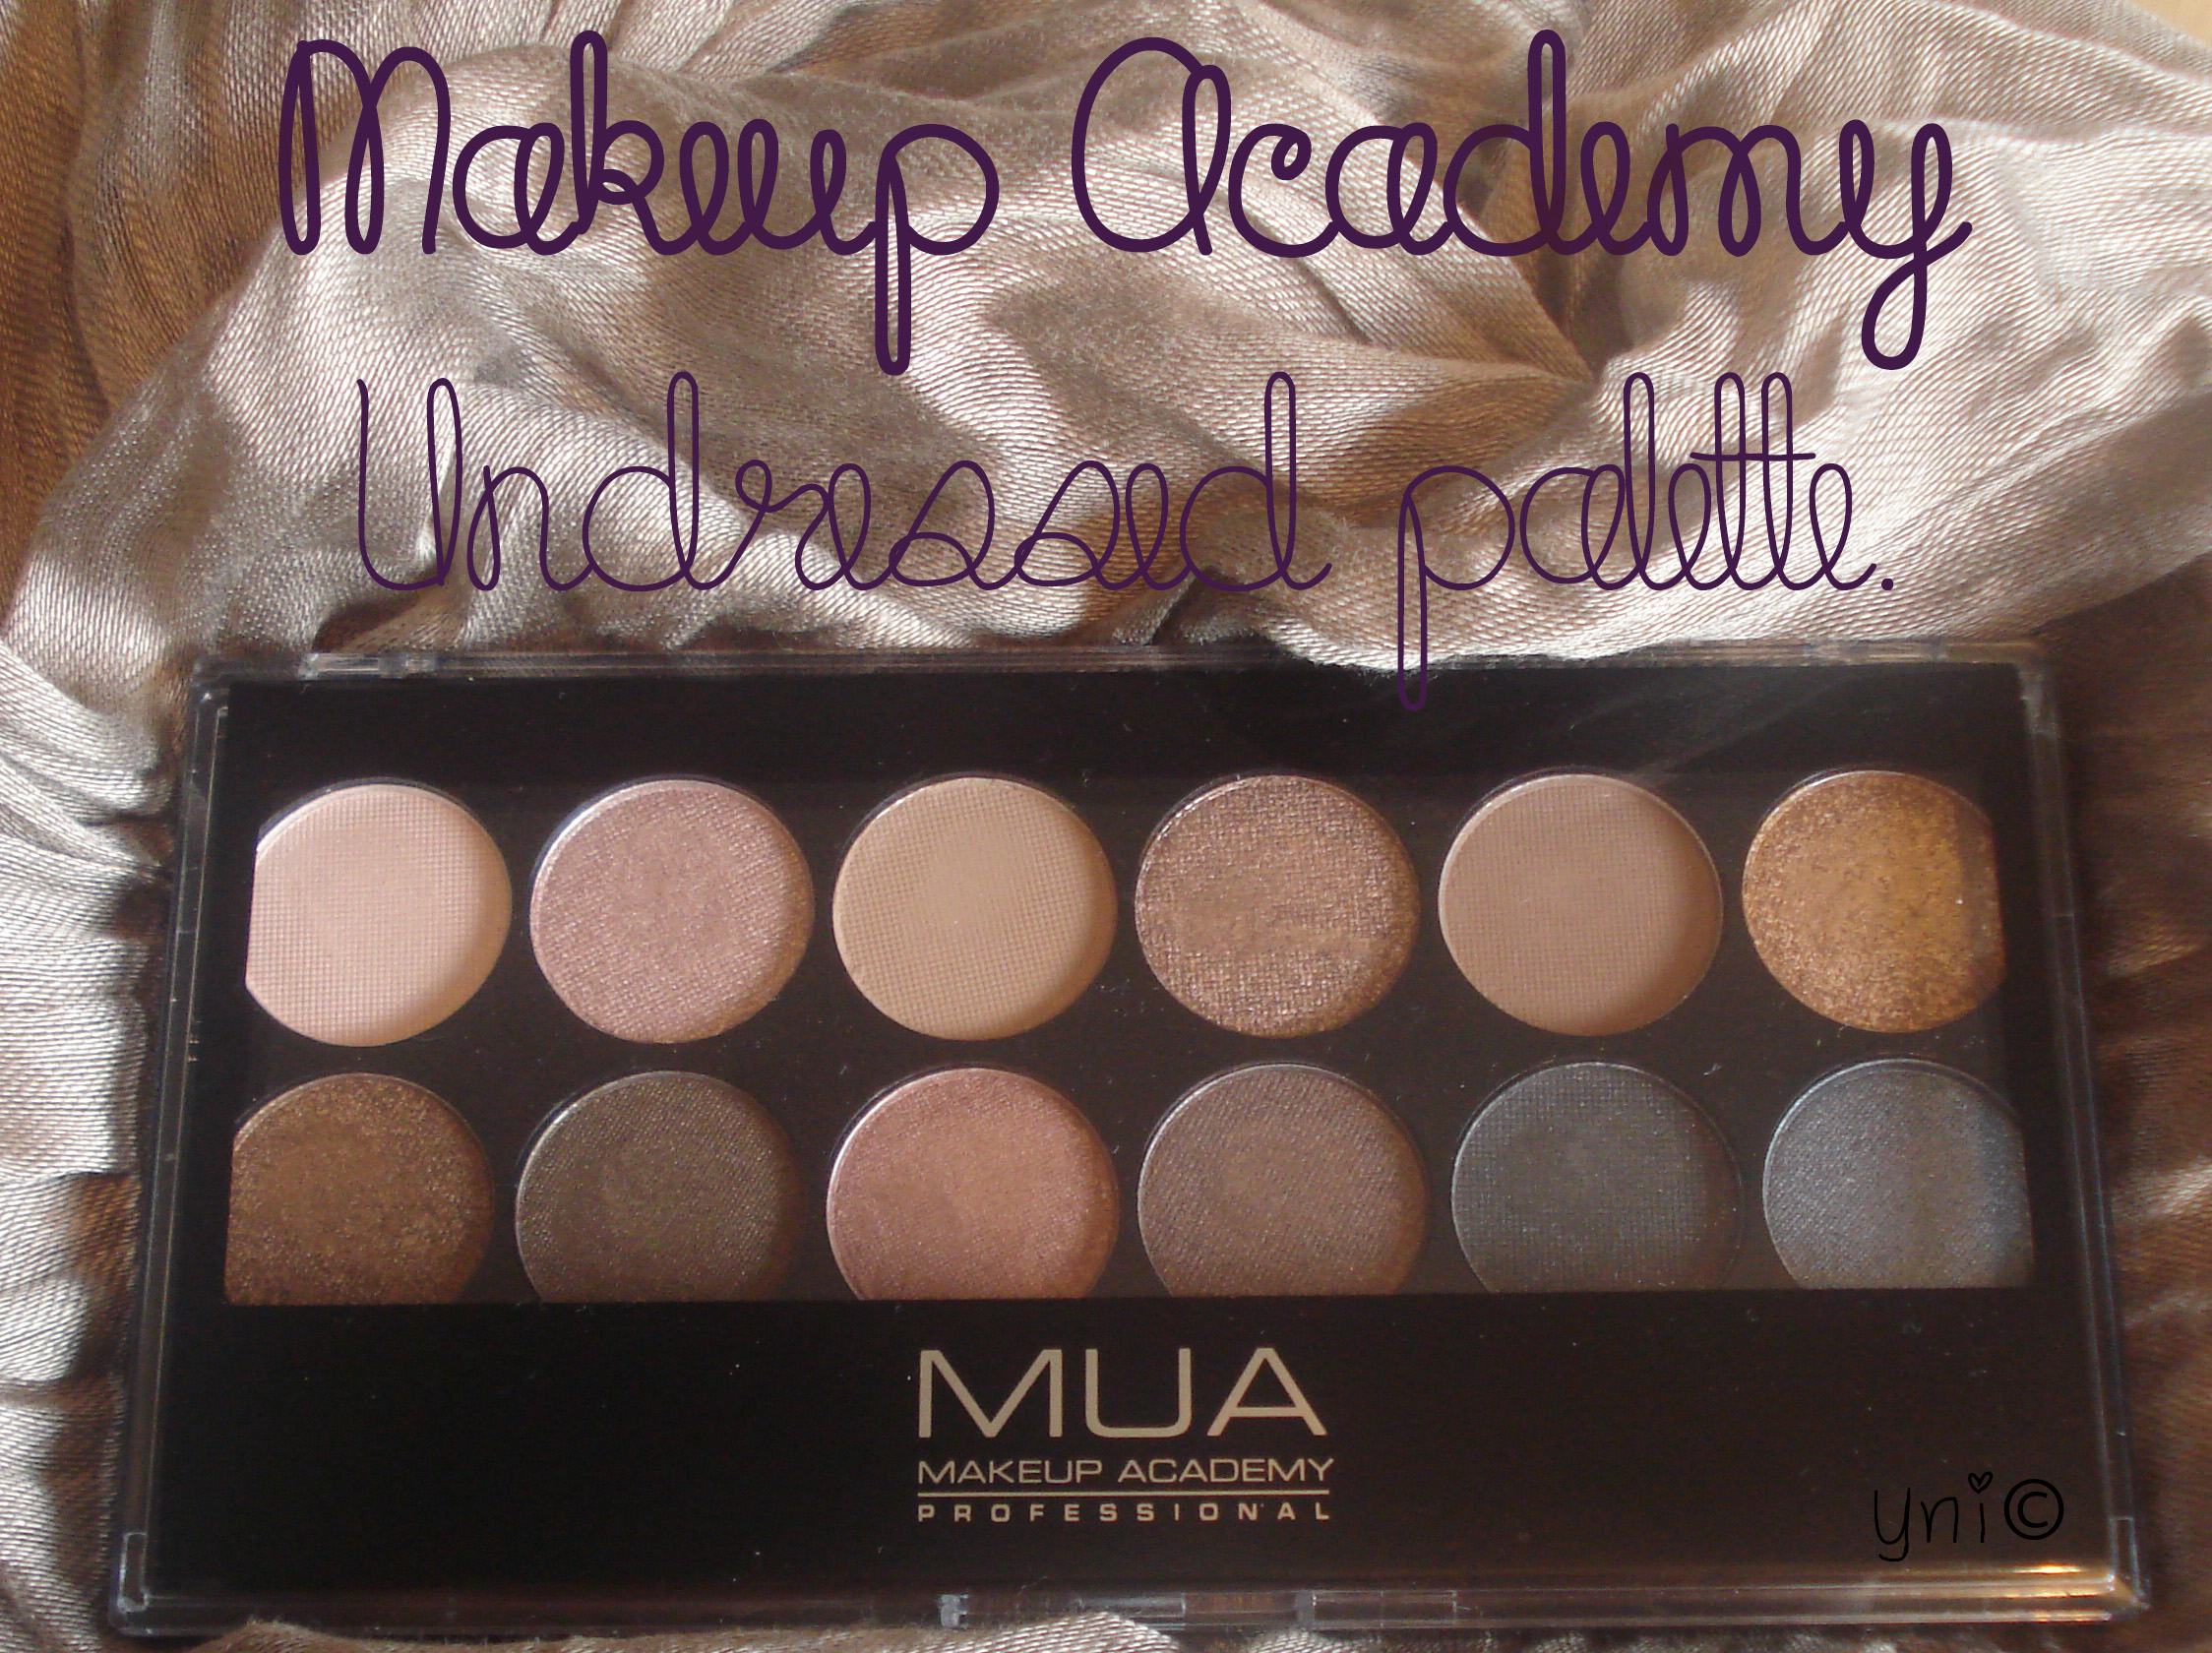 Makeup Academy ‘Undressed palette’.